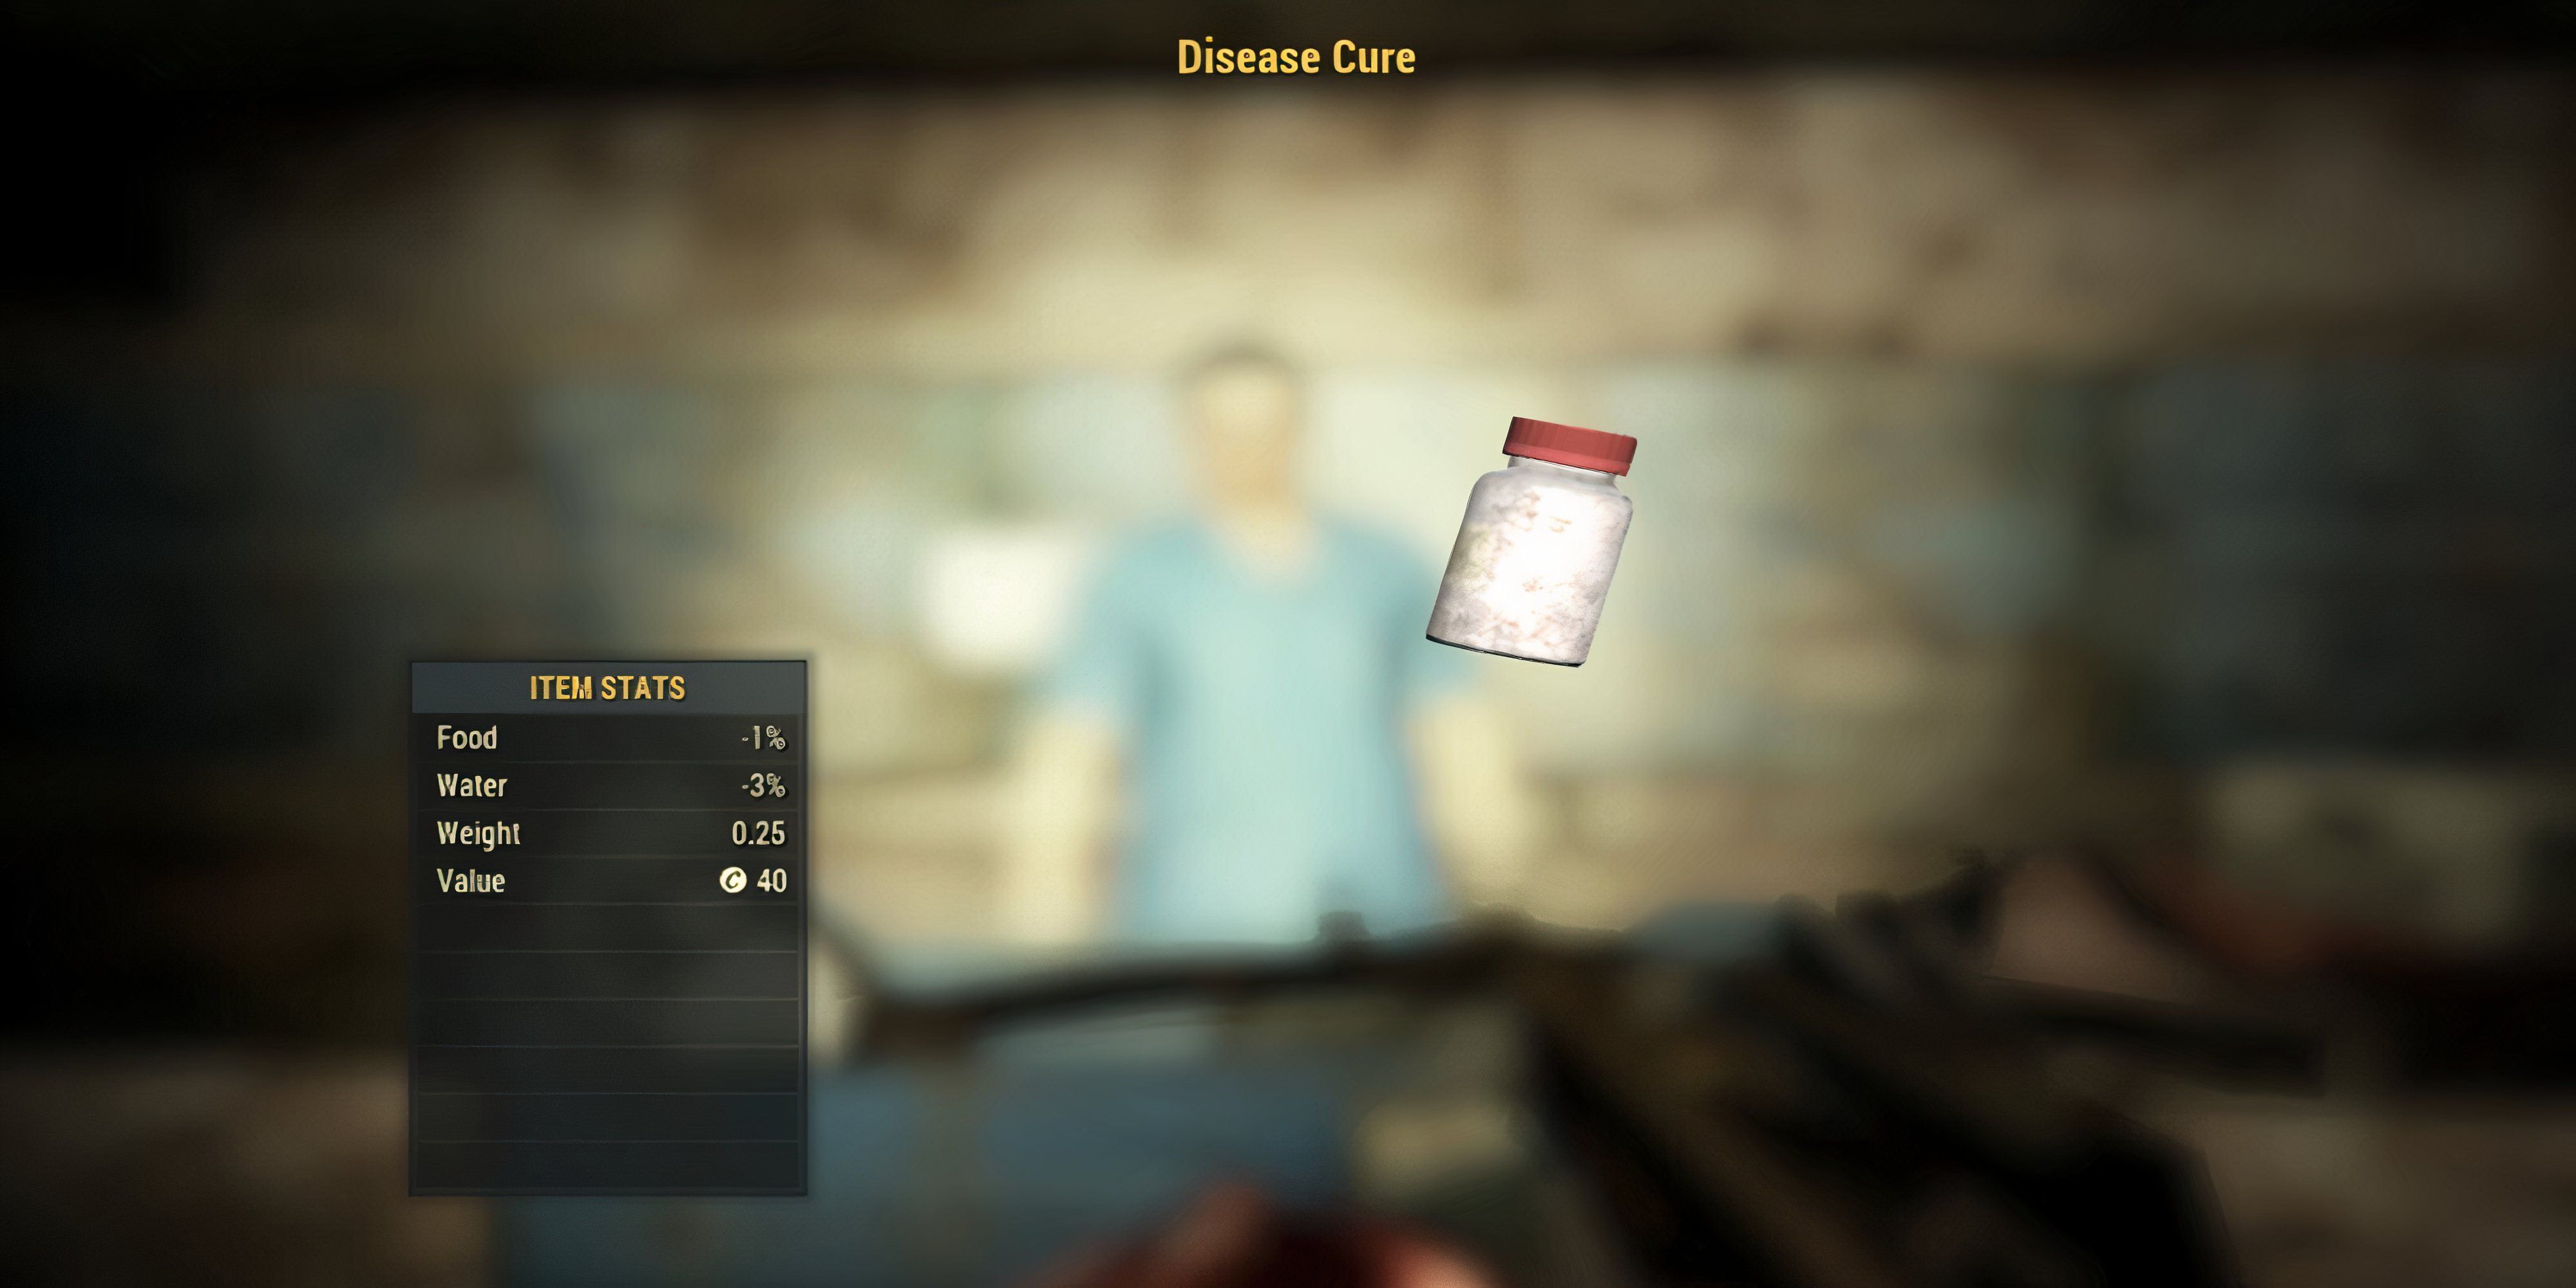 Inspecting a Disease Cure in Fallout 76